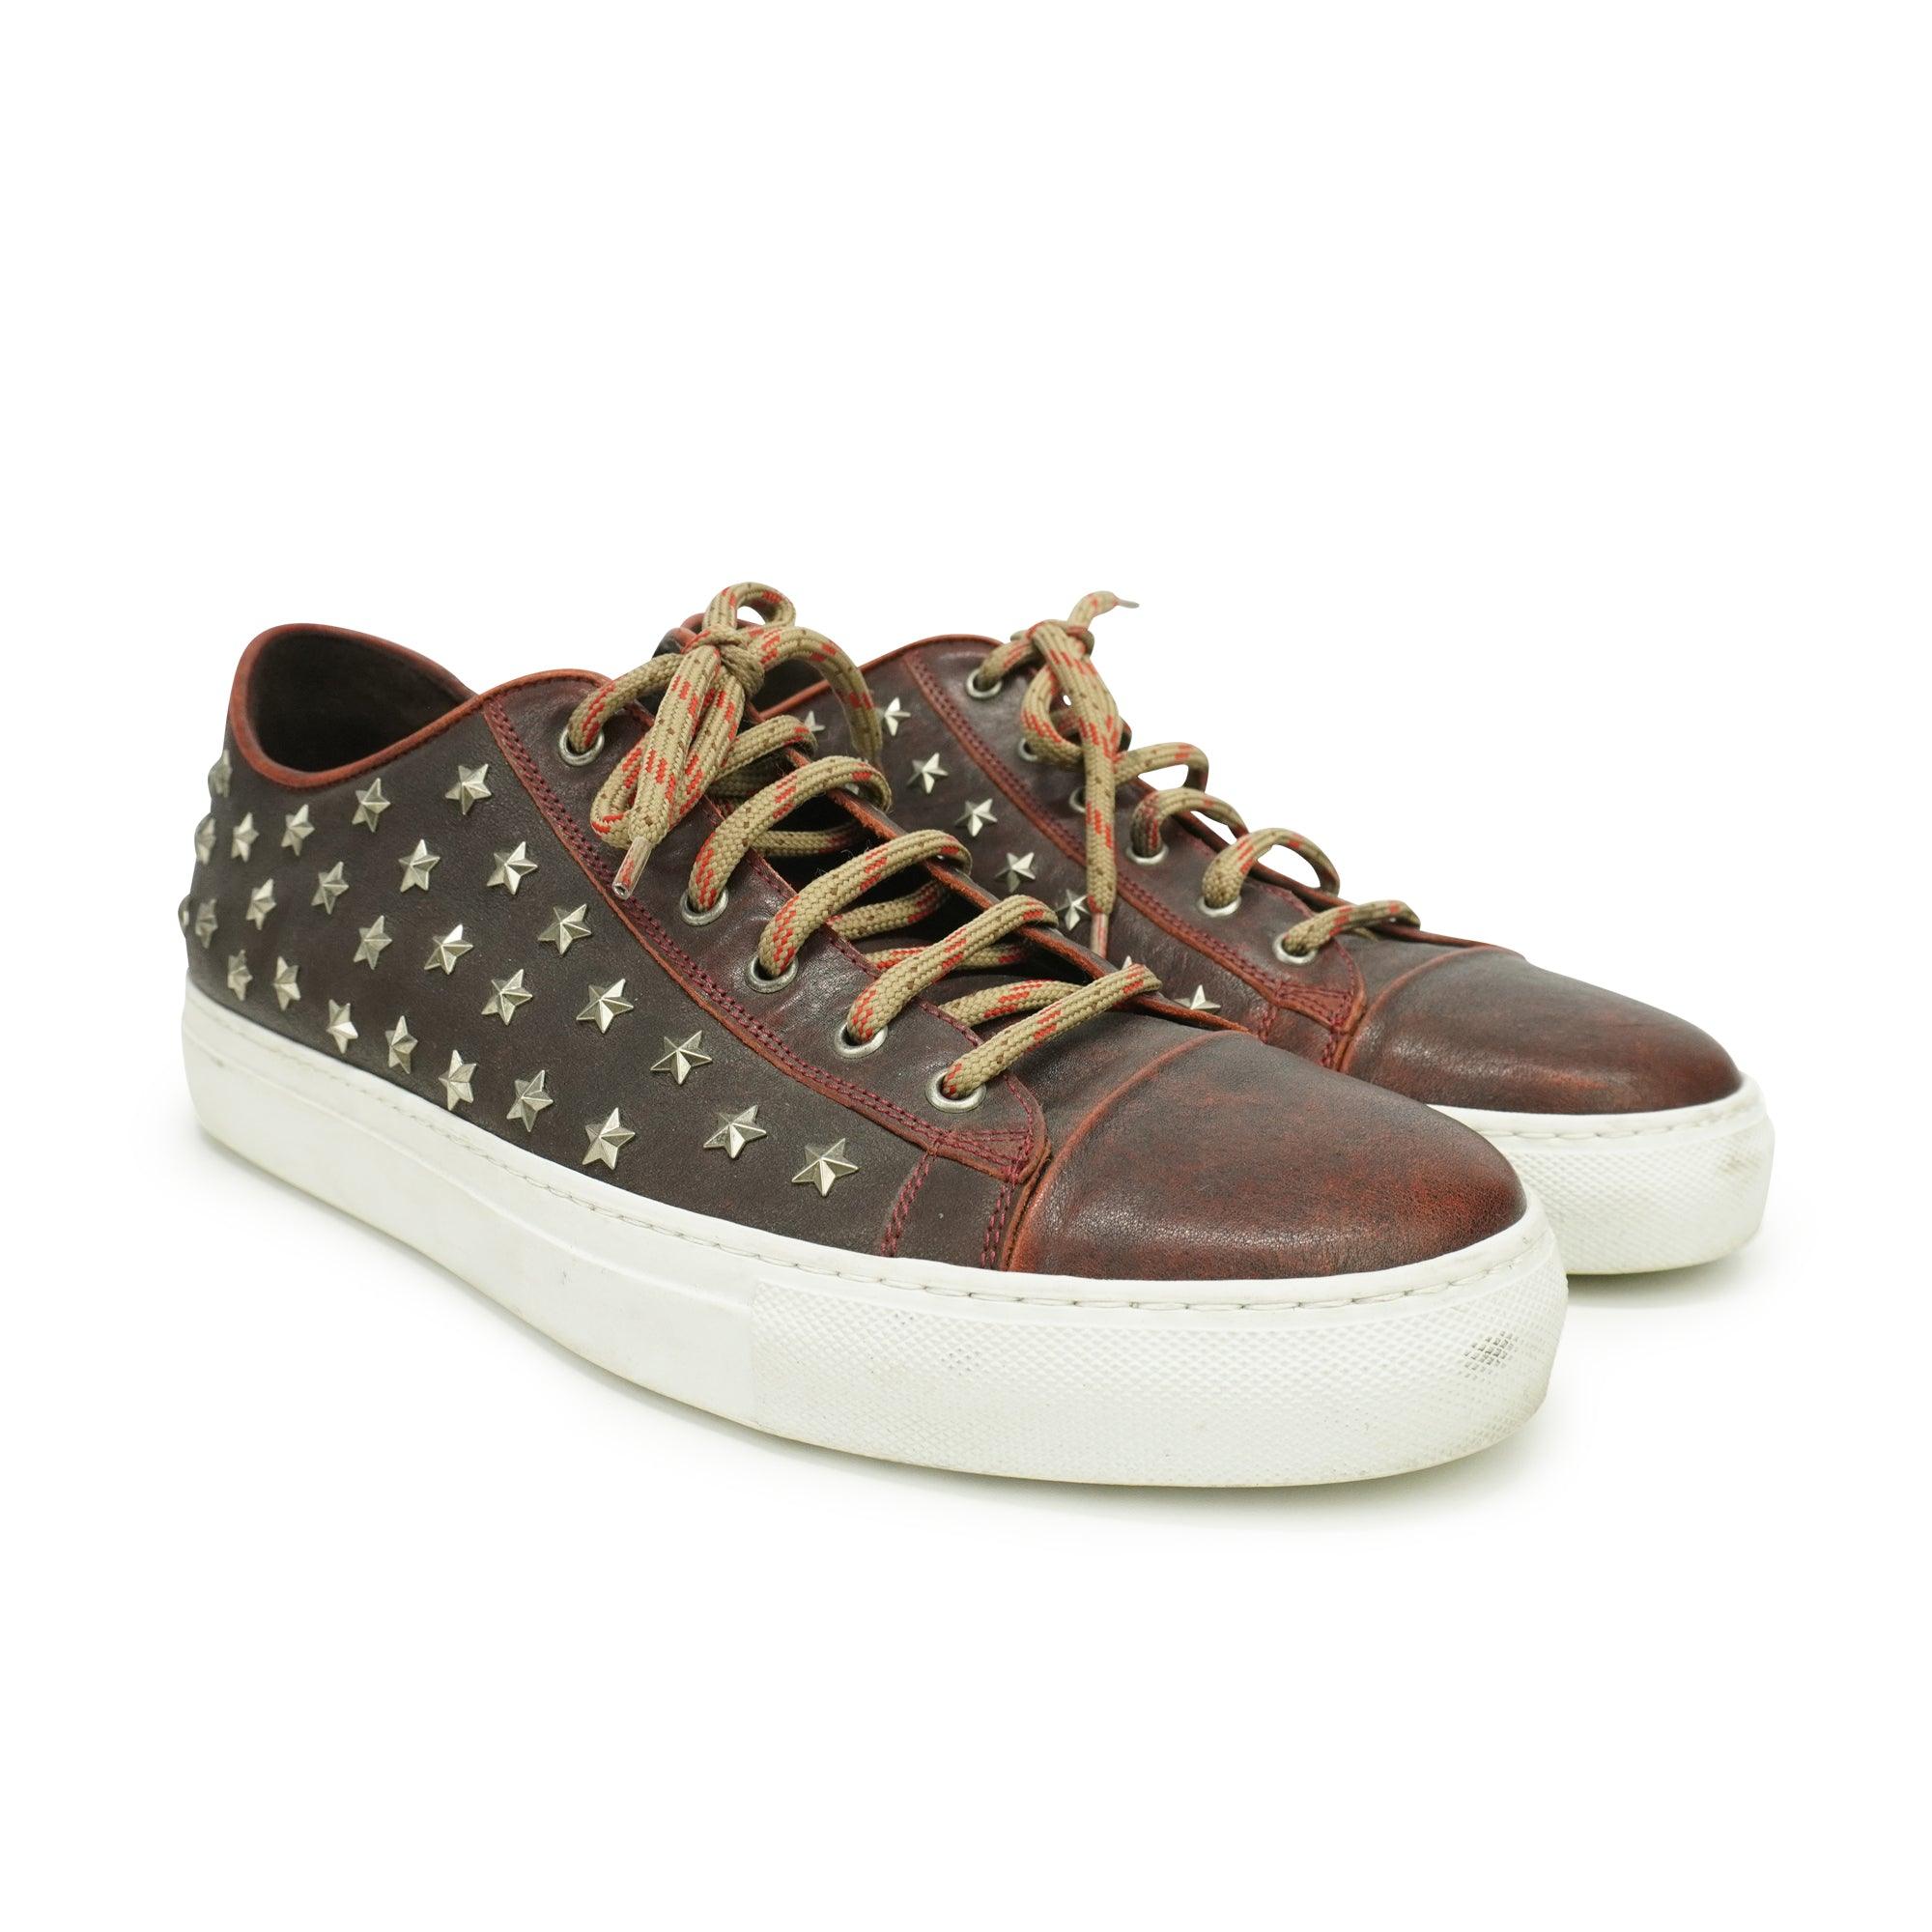 Dsquared2 Sneakers - Men's 45 - Fashionably Yours